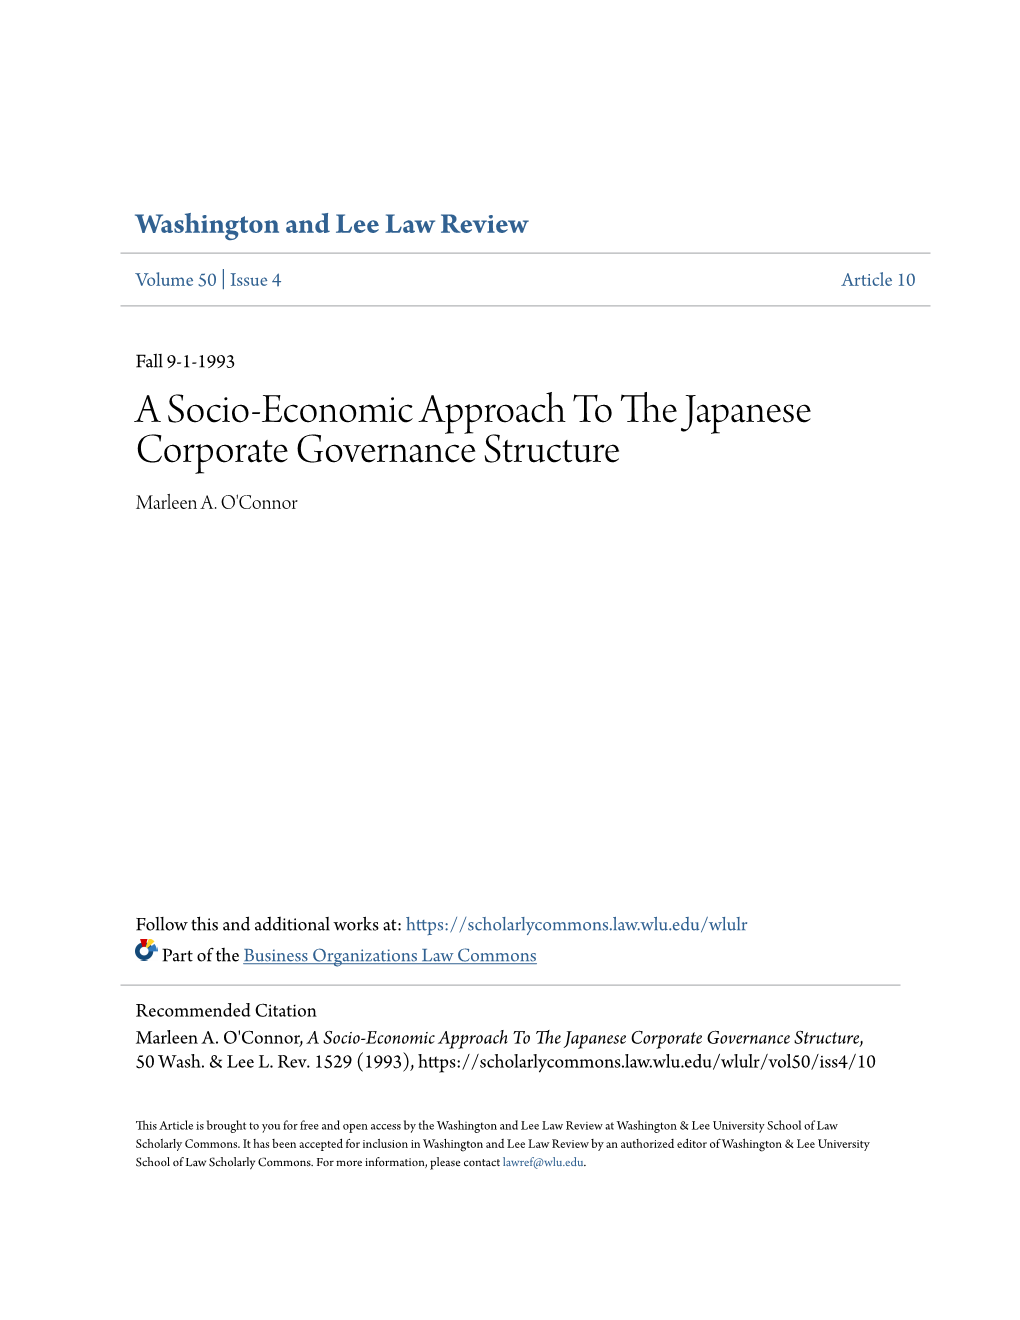 A Socio-Economic Approach to the Japanese Corporate Governance Structure, 50 Wash